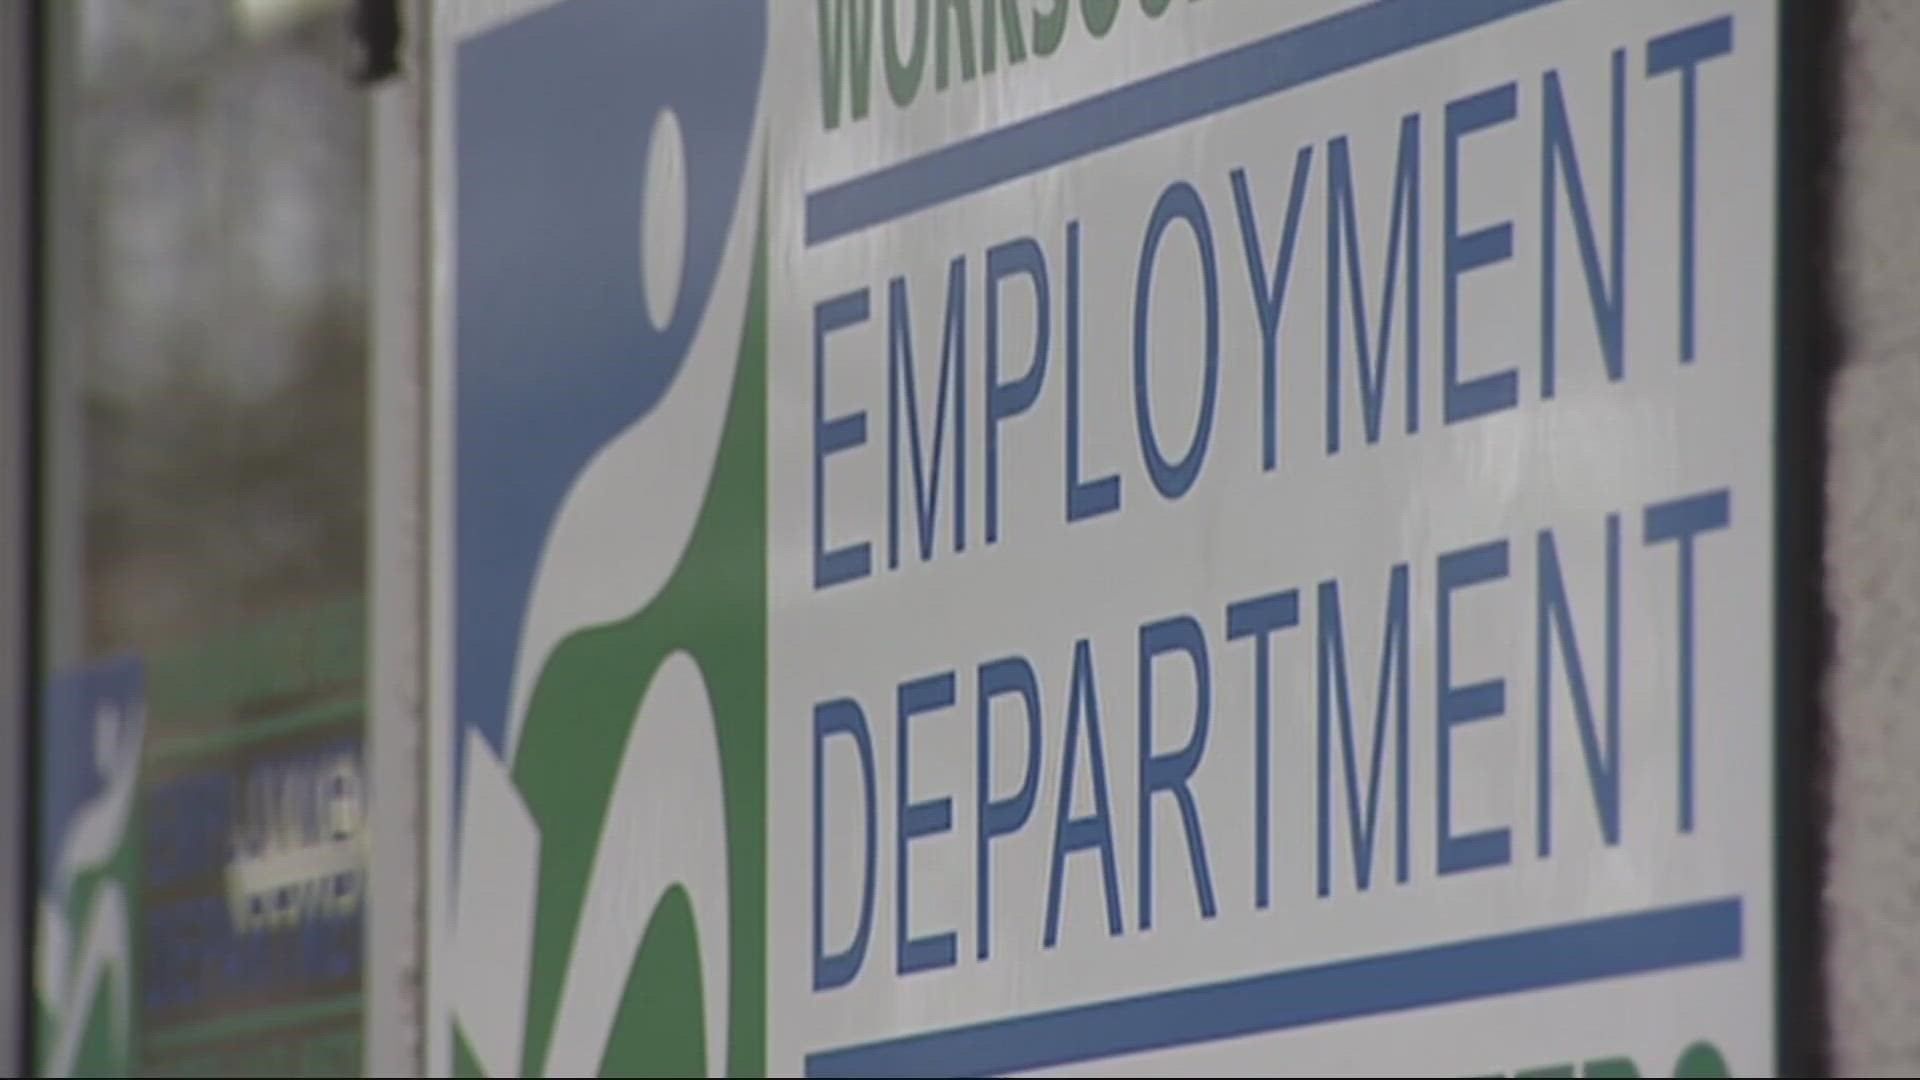 The finance and insurance industry has lost about 1,500 jobs over the past year, according to State Employment Economist.